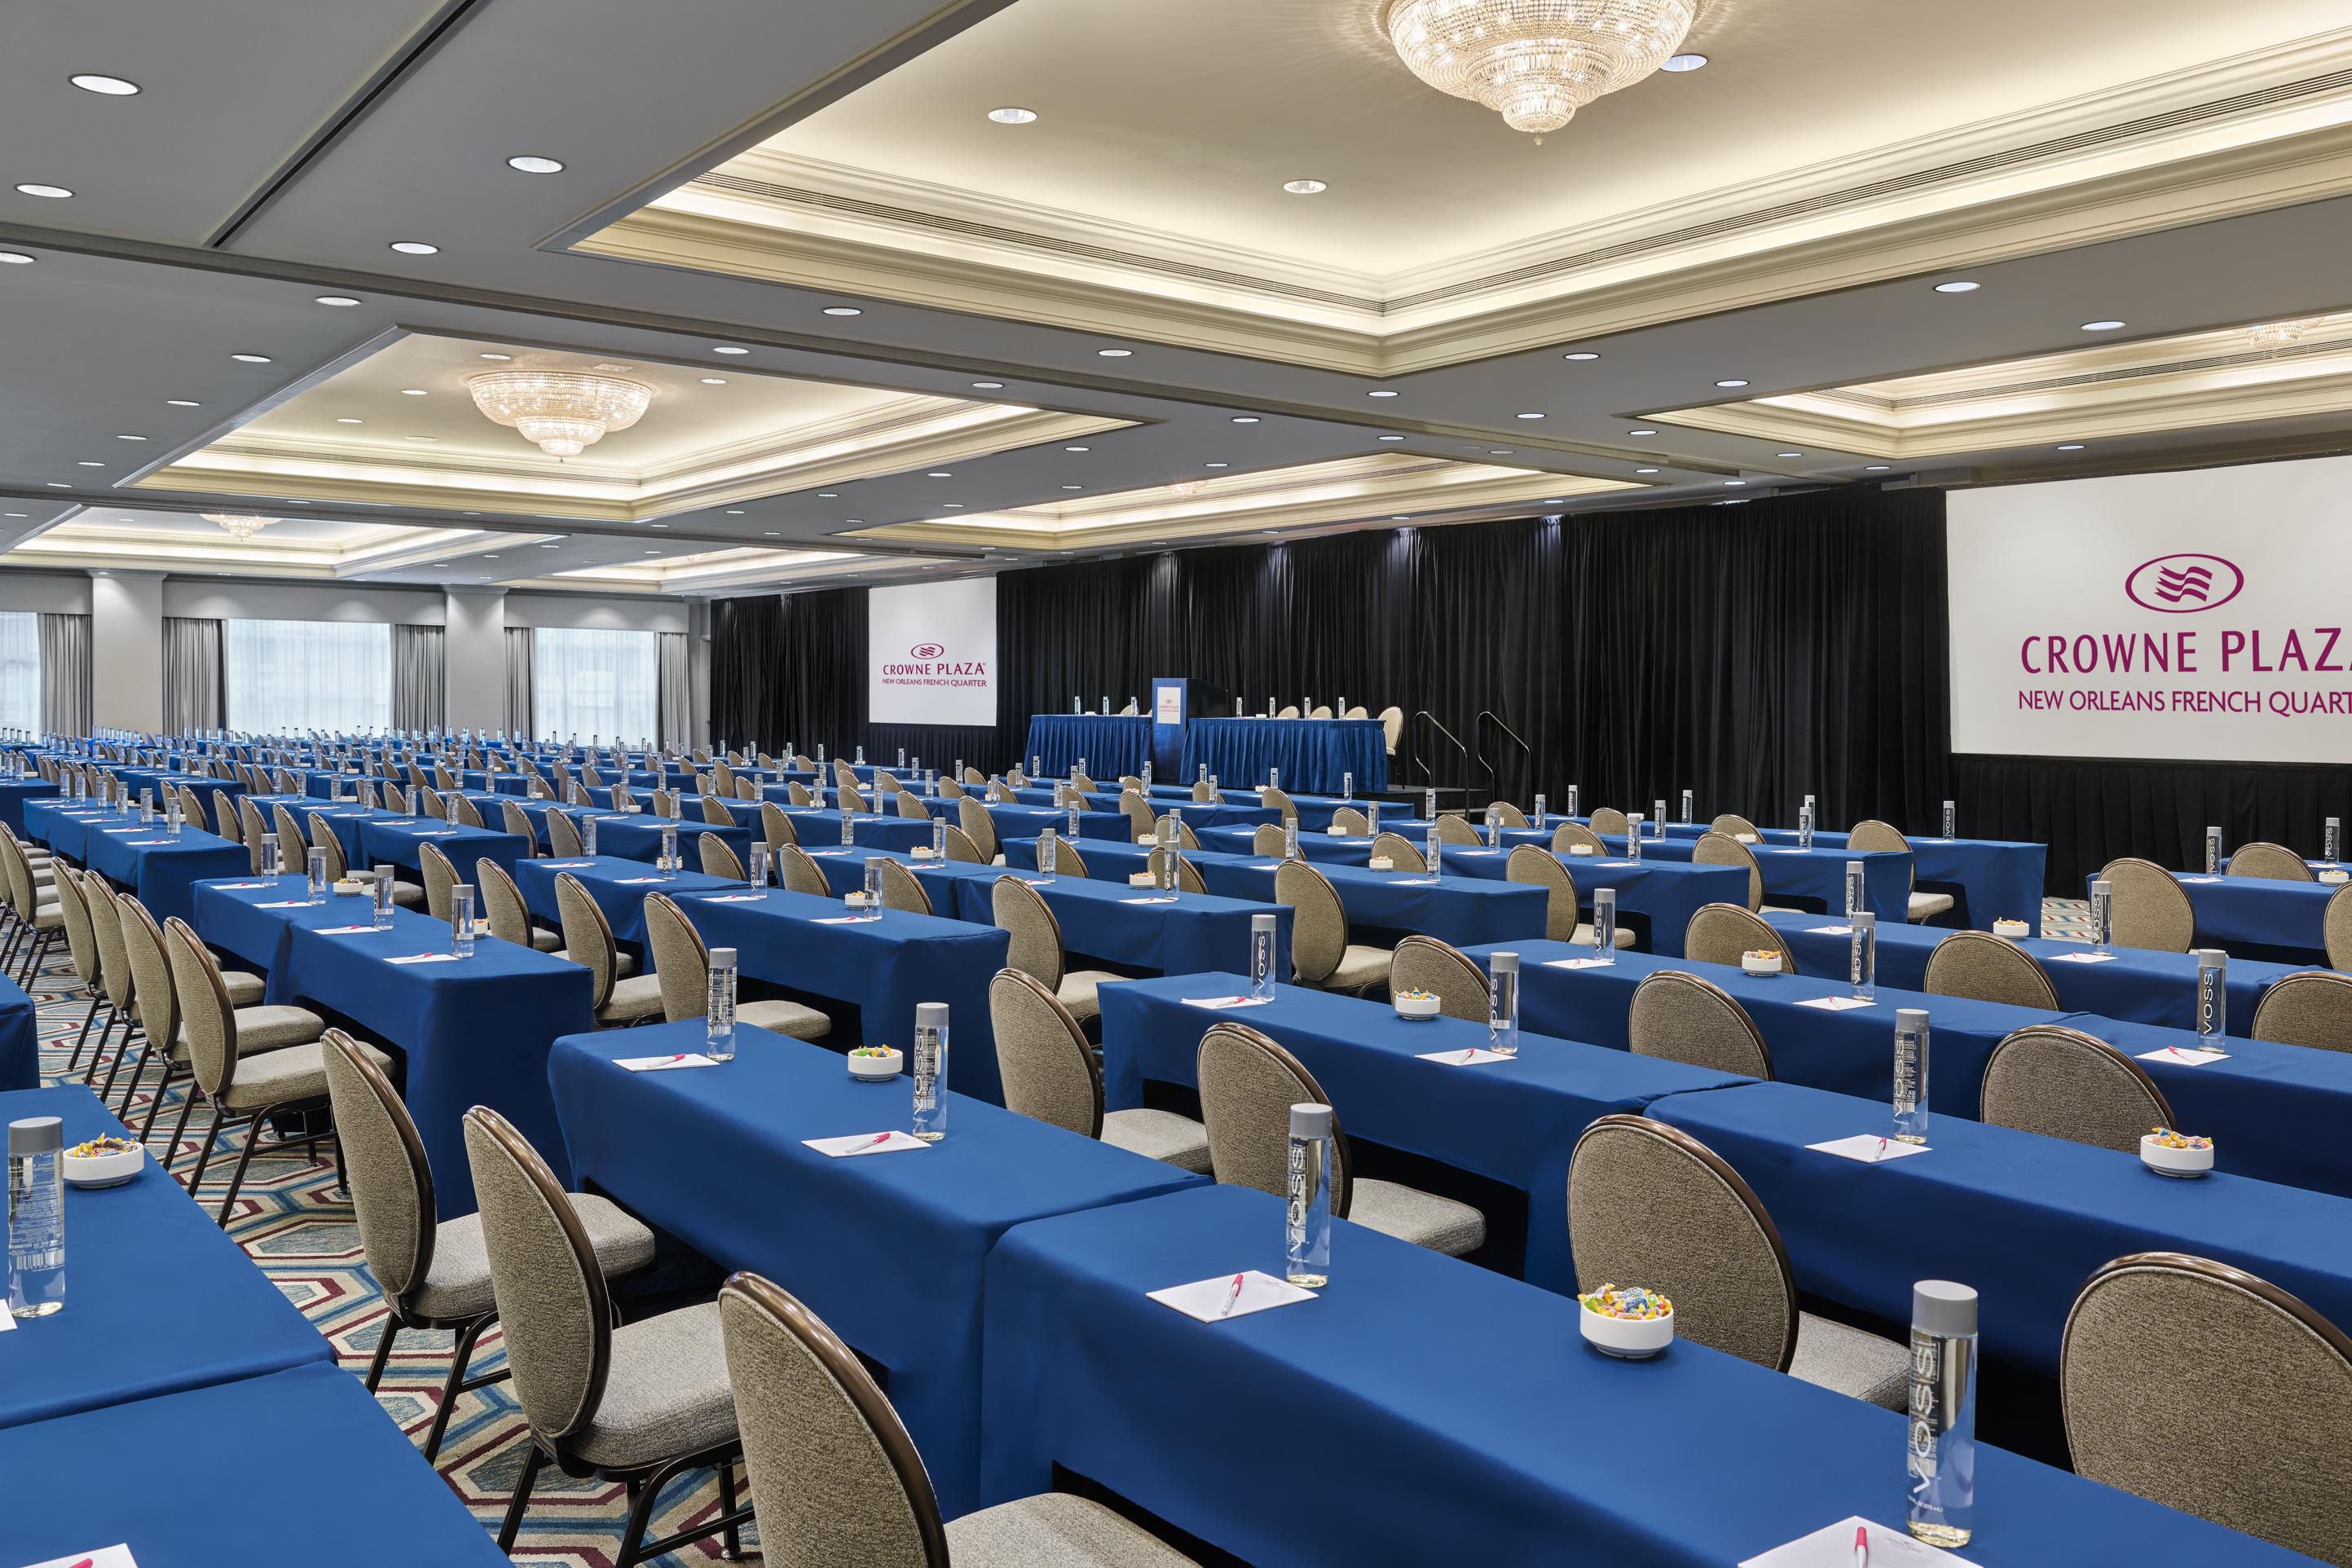 Grand Ballroom configuration is designed for up to 500 guests